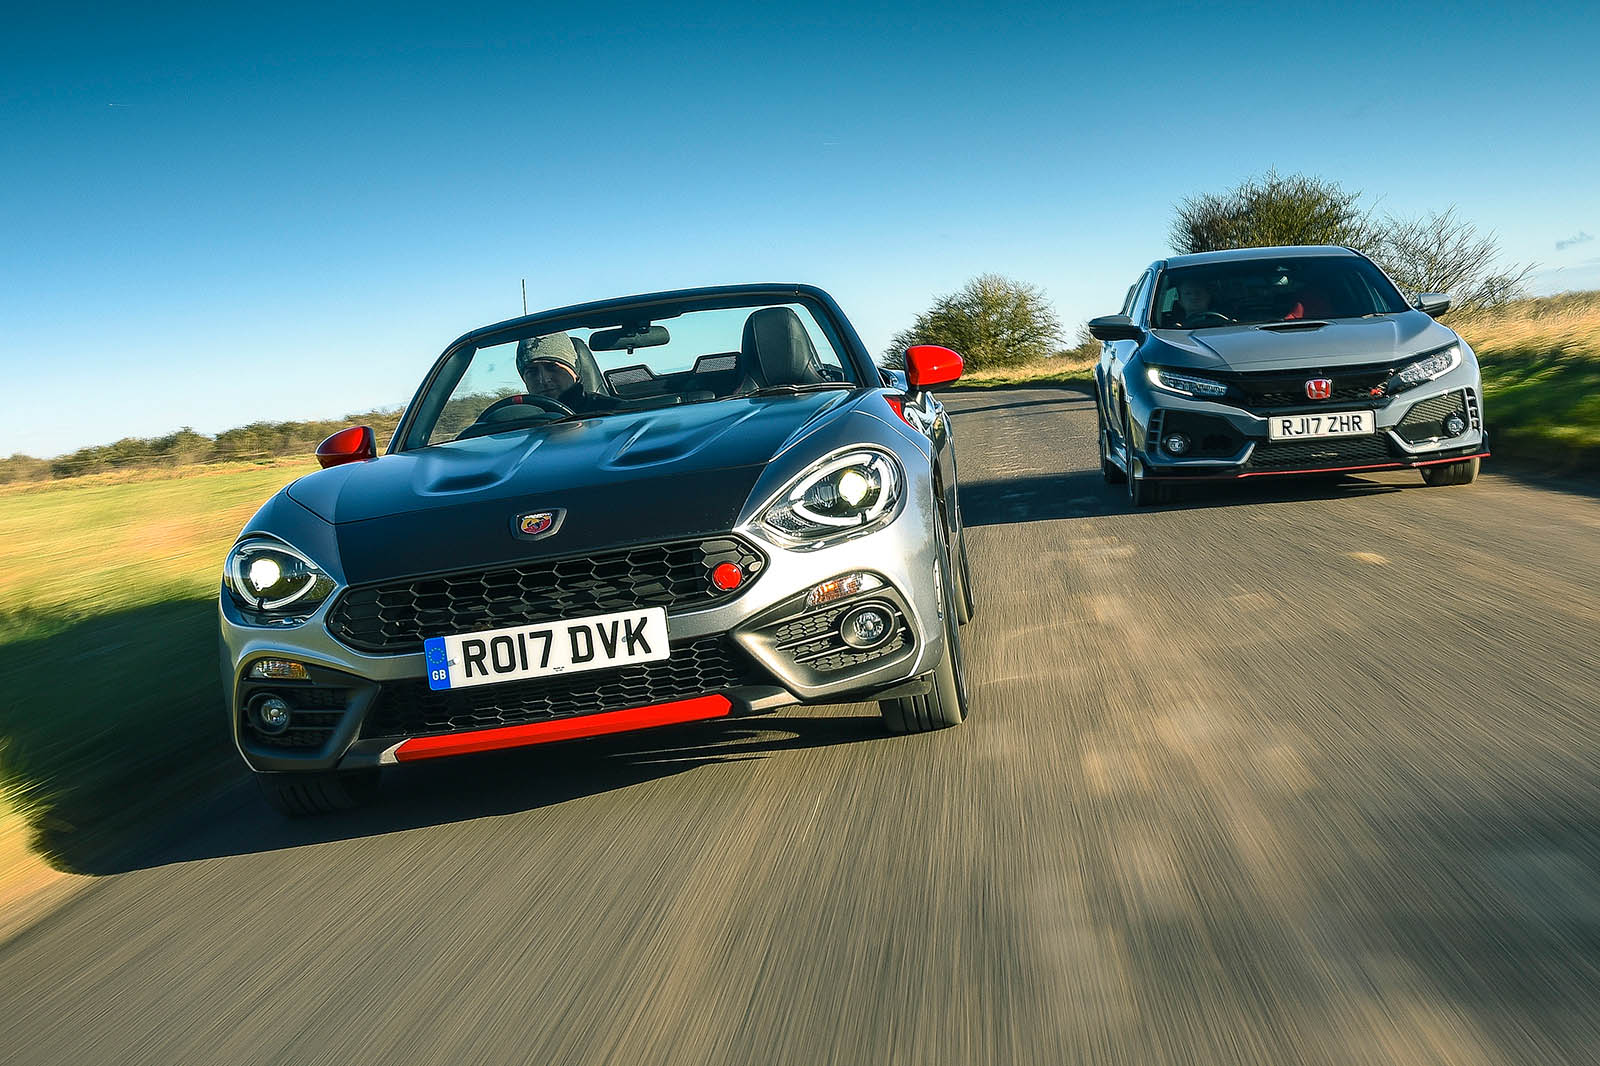 Honda Civic Type R vs Abarth 124 Spider: which is best? | Autocar